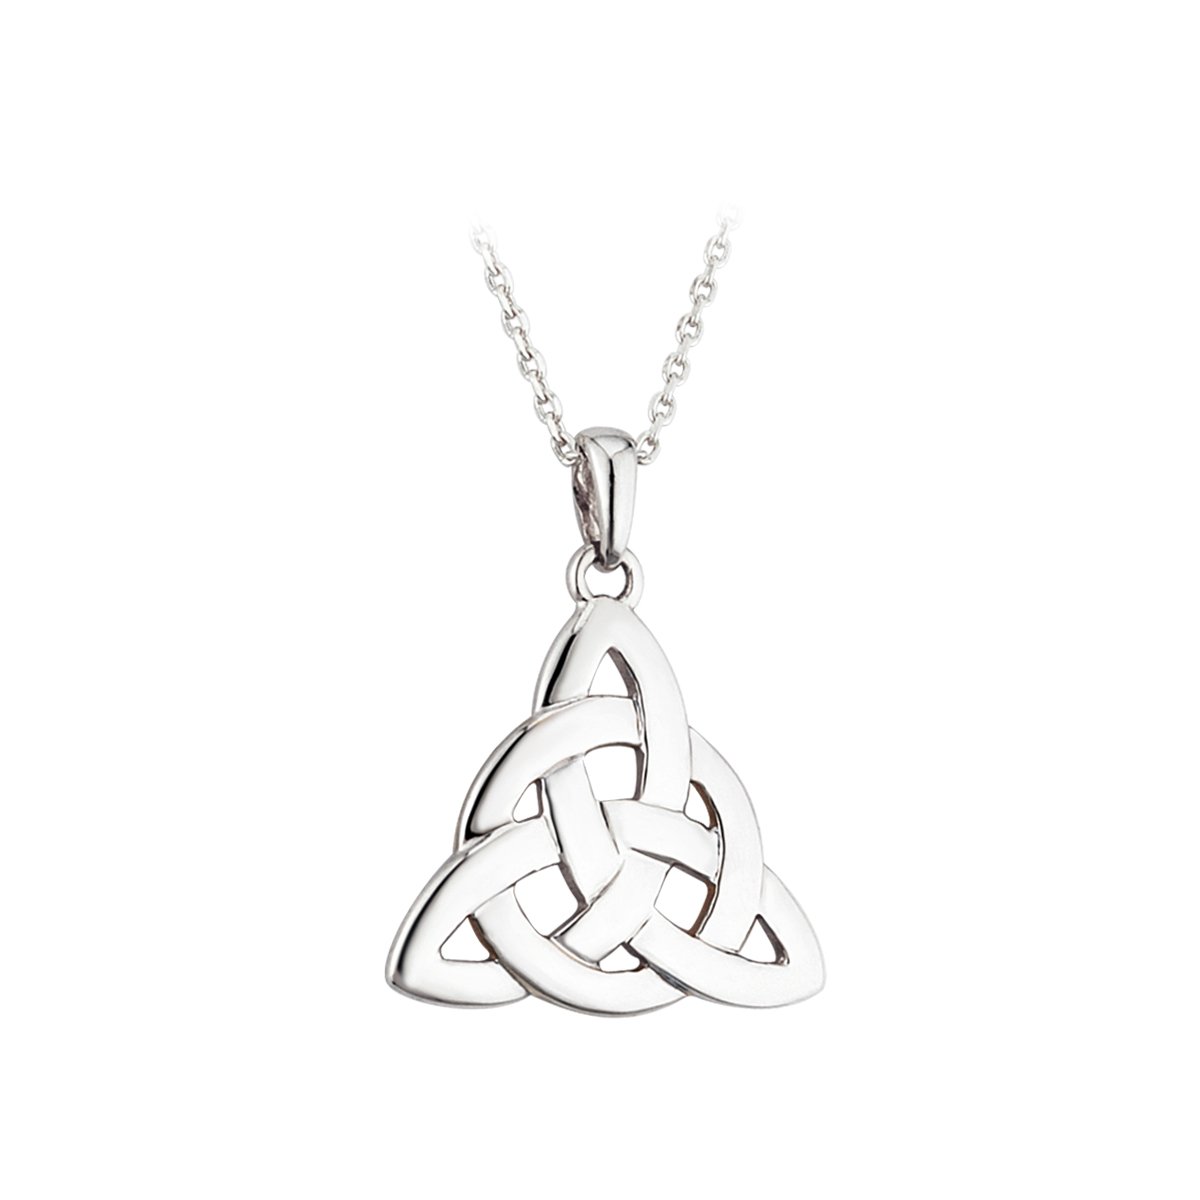 Product image for Celtic Pendant - Sterling Silver Triangular Celtic Knot Pendant with Chain